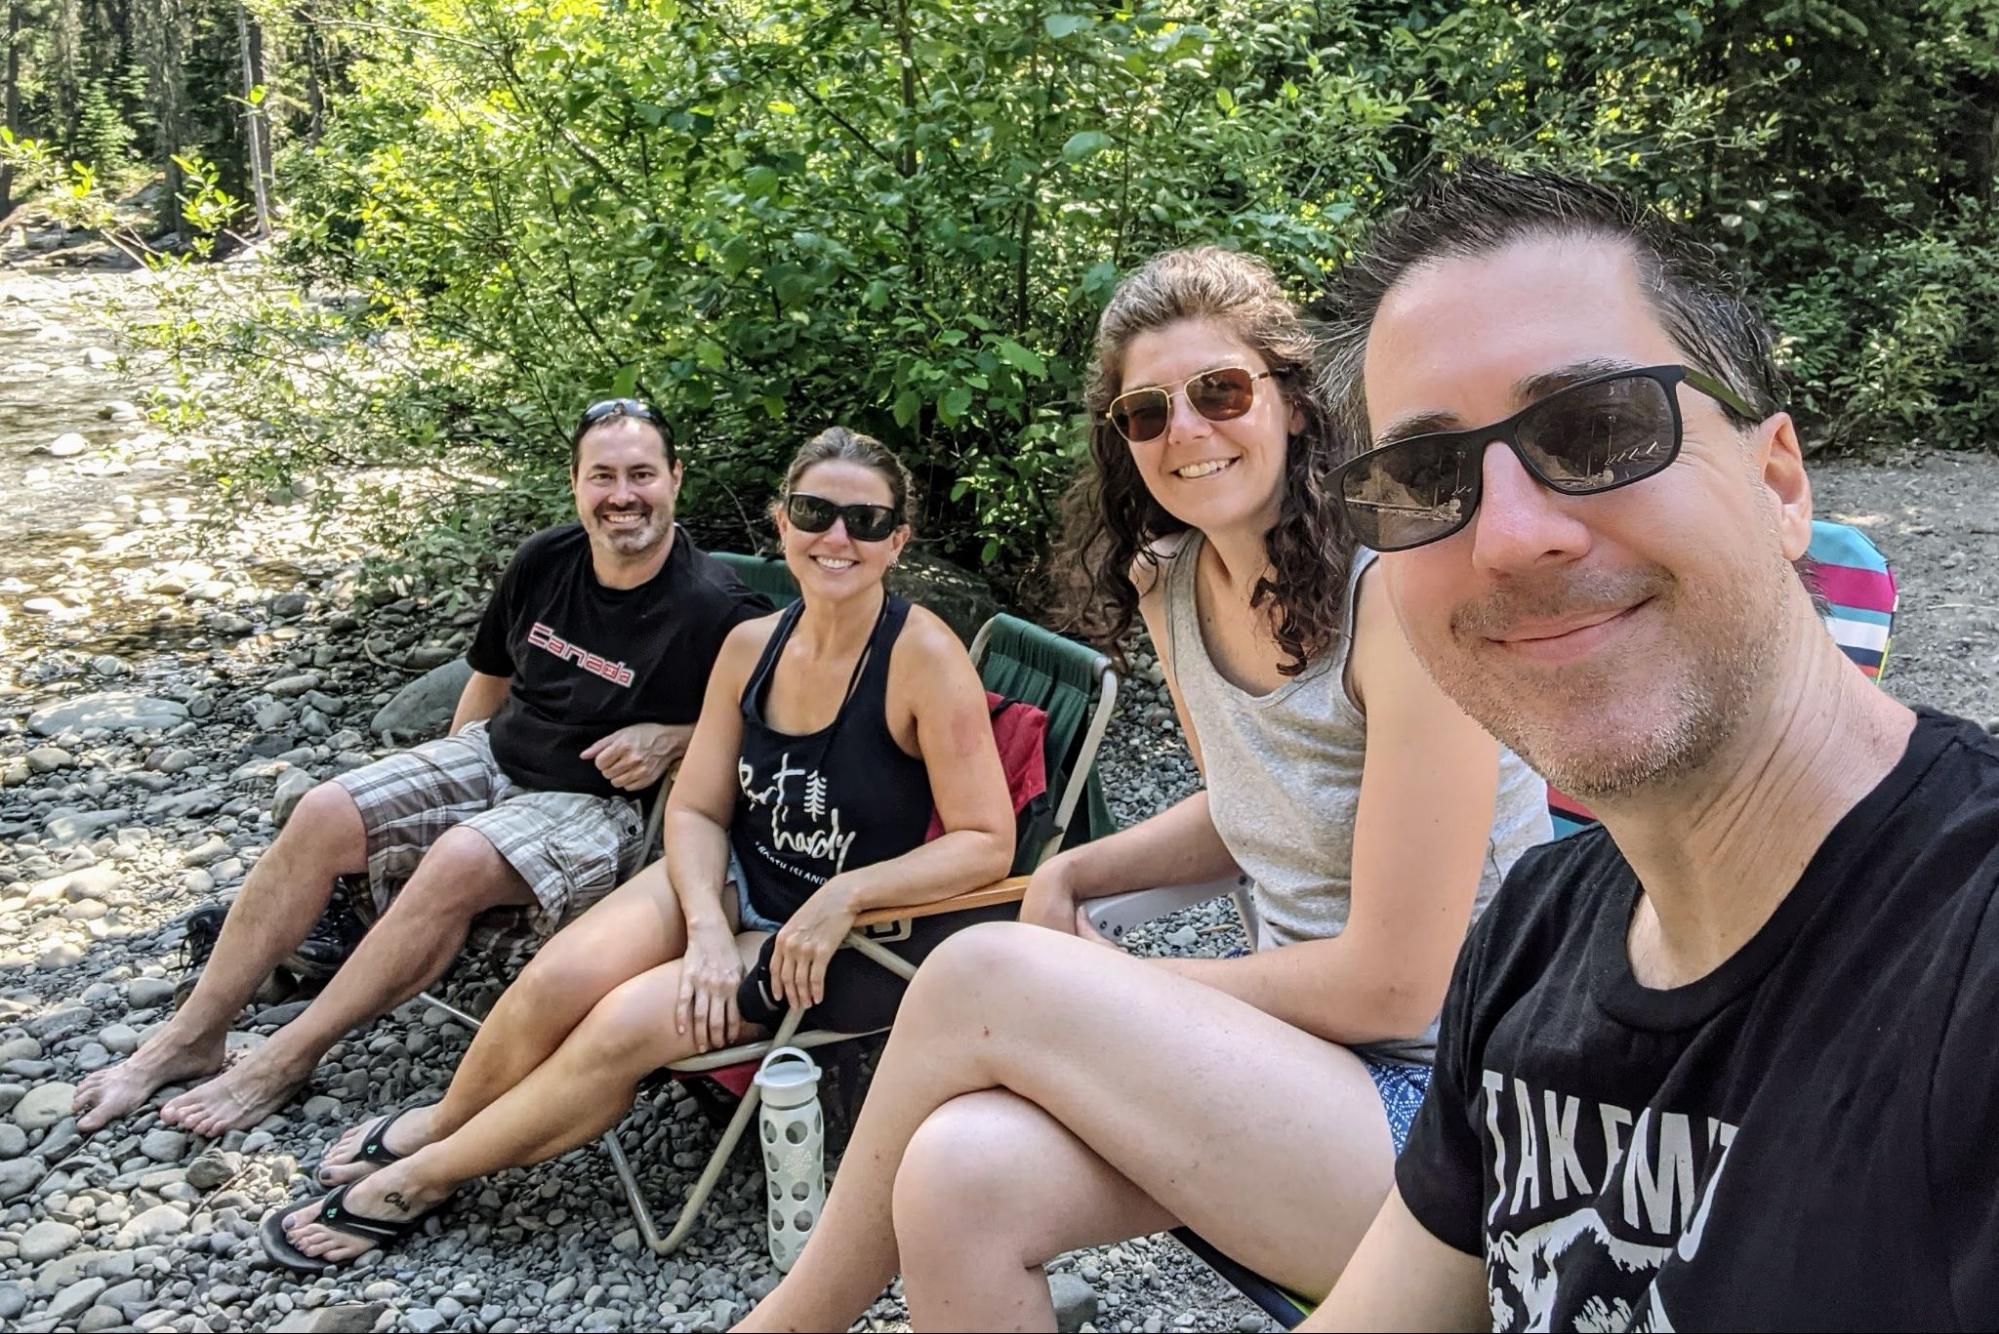 Chris, Emilie, Mel, and Jay (left to right) cooling off on a hot day next to the Similkameen river at the Coldspring Campground in Manning Park, BC. 